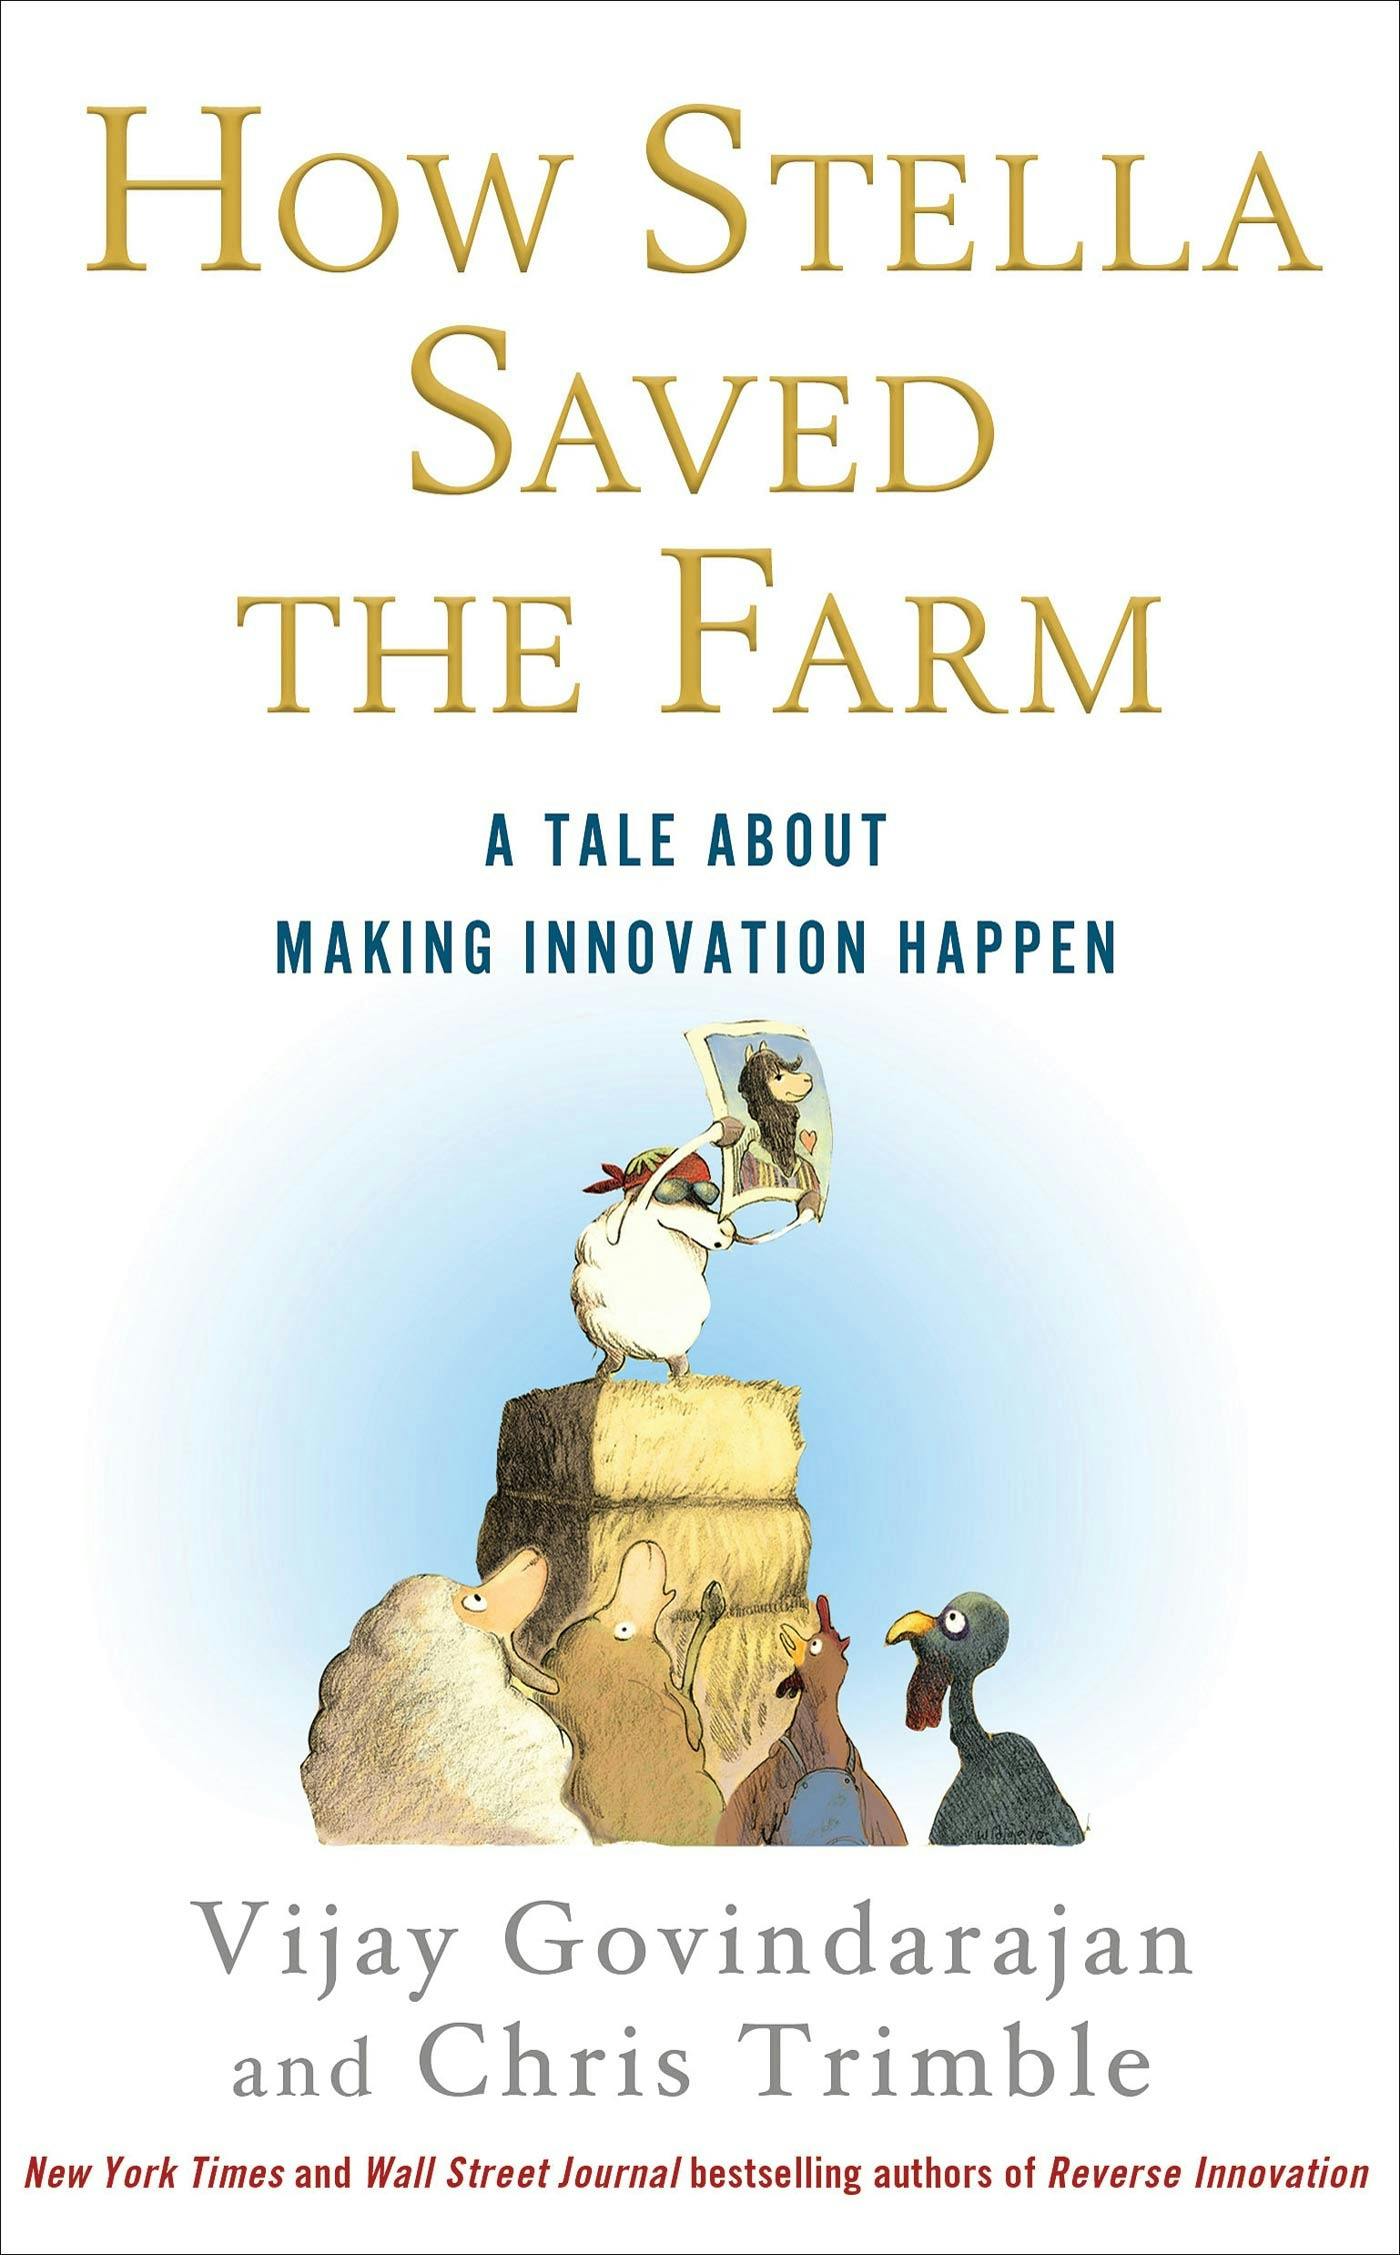 Describes for How Stella Saved the Farm by authors